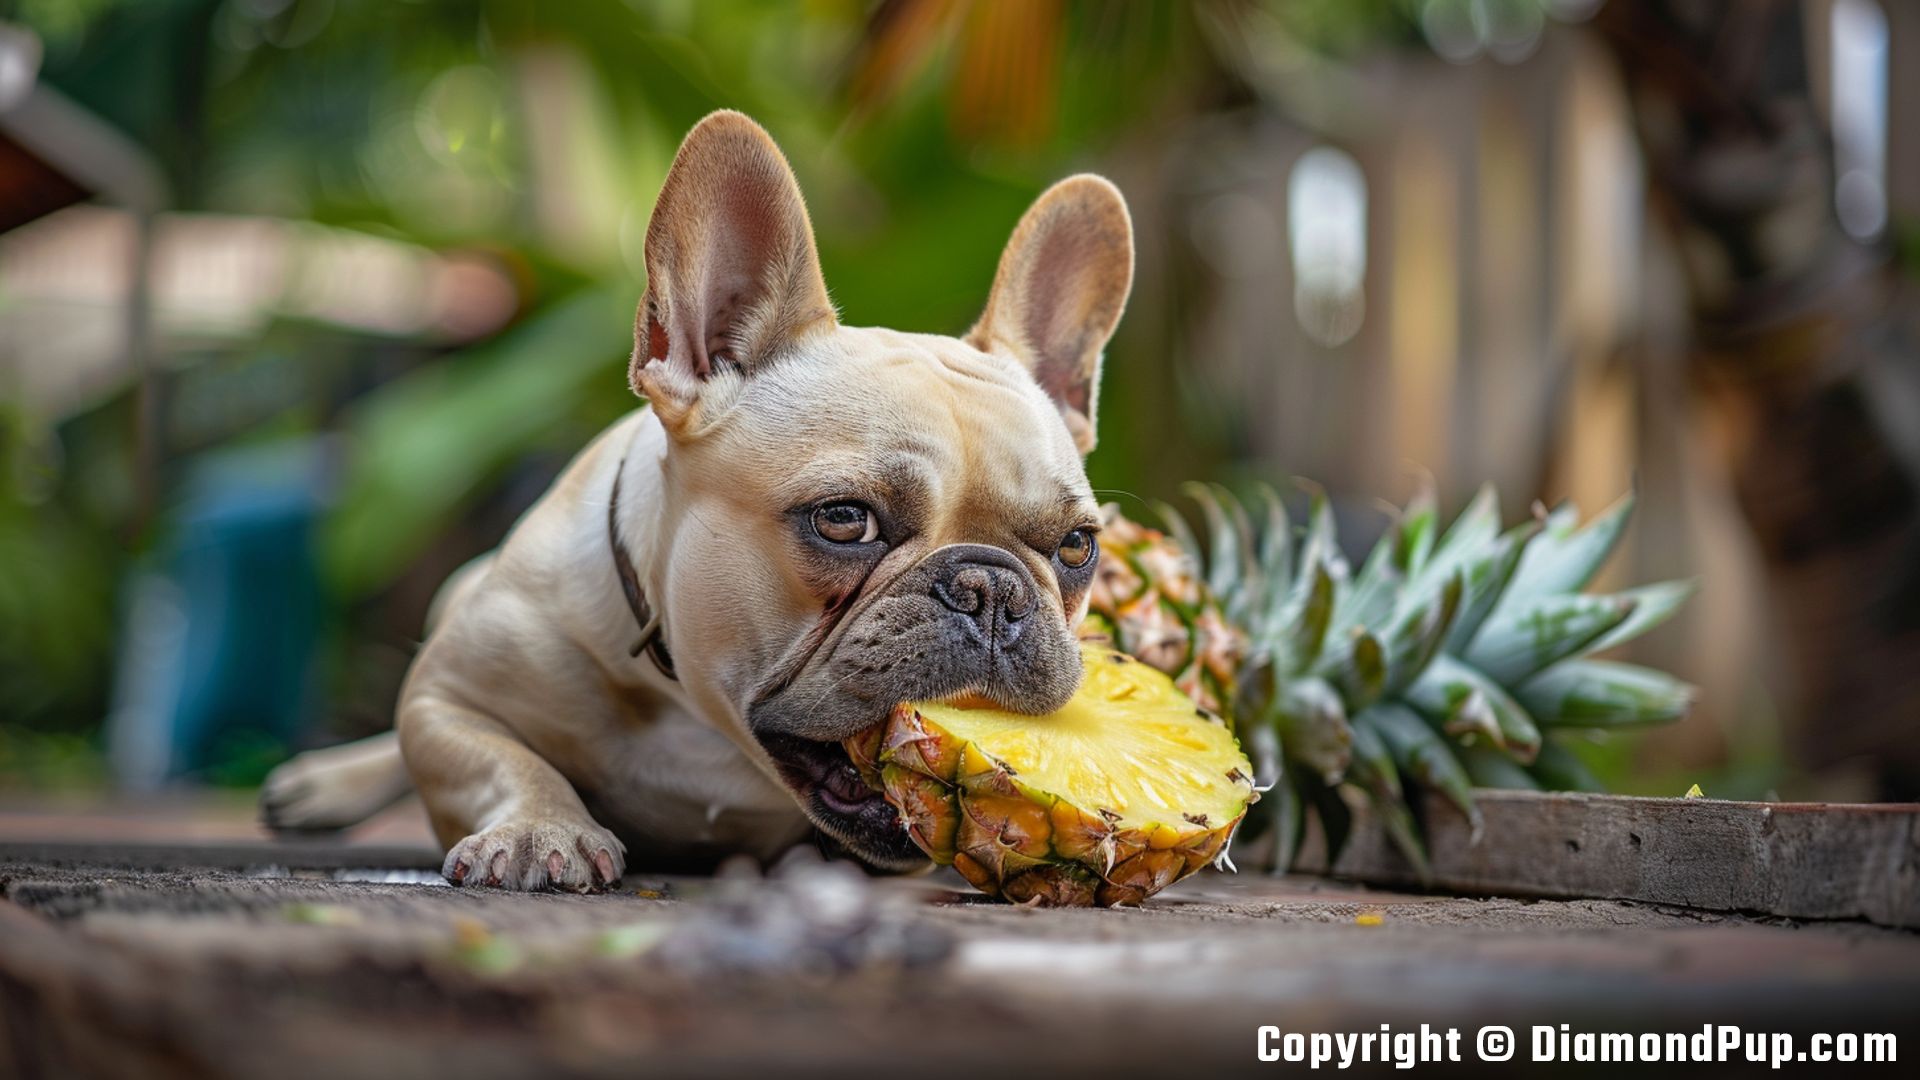 Image of a Cute French Bulldog Eating Pineapple